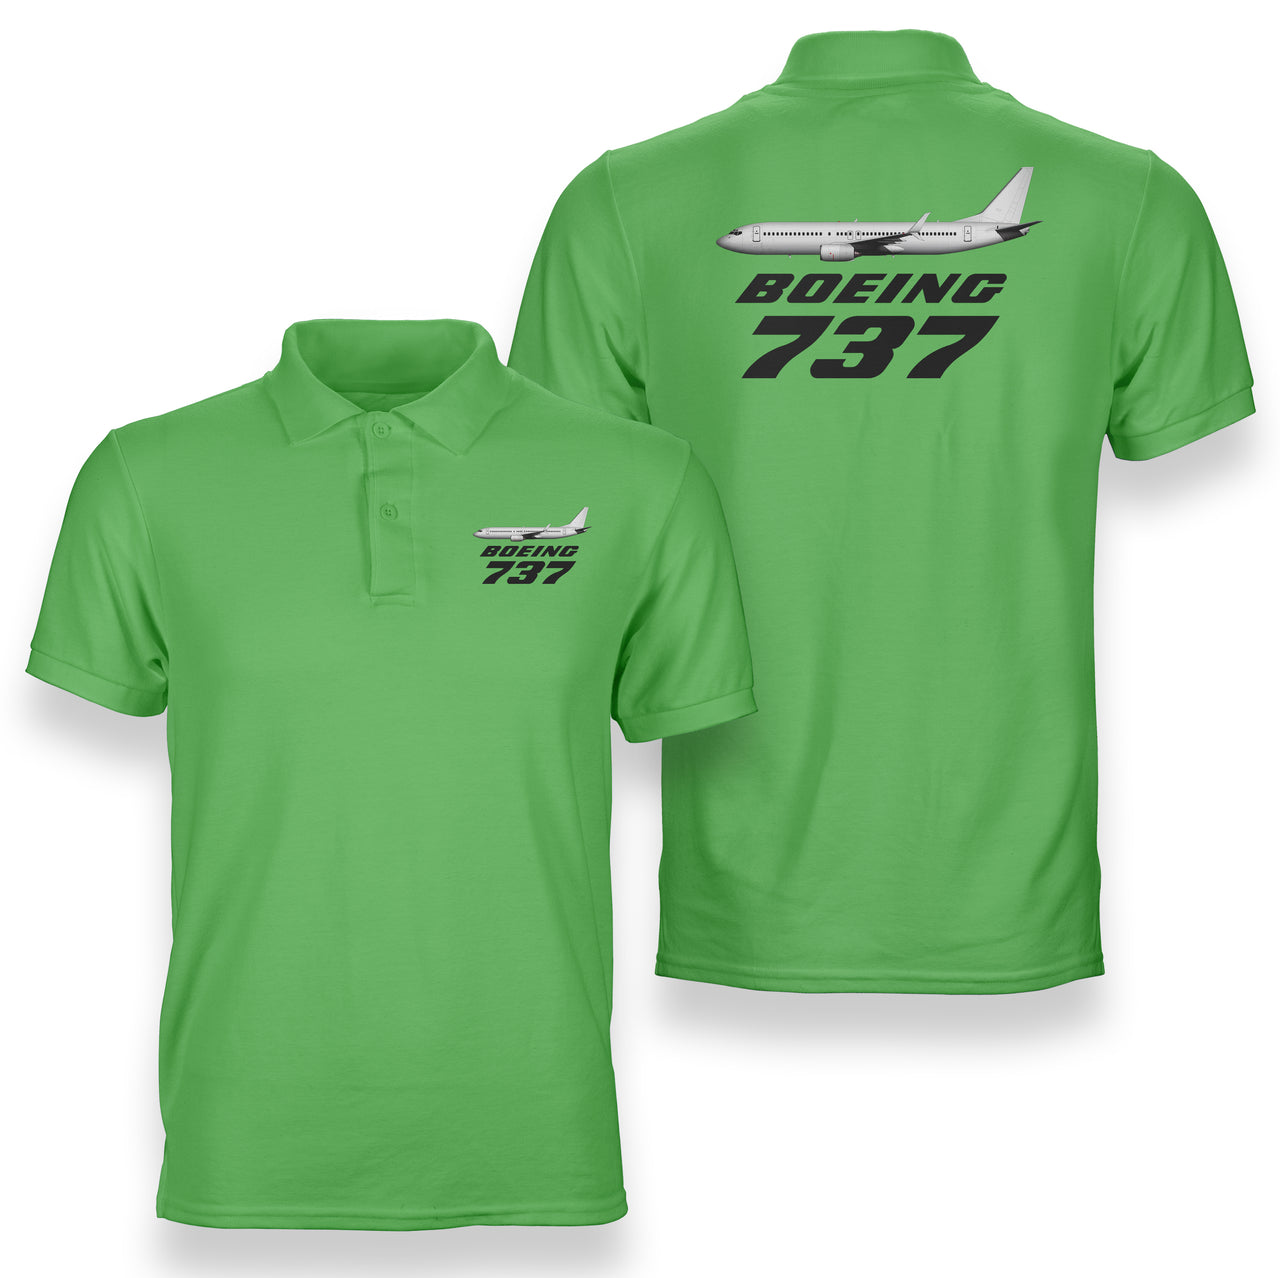 The Boeing 737 Designed Double Side Polo T-Shirts